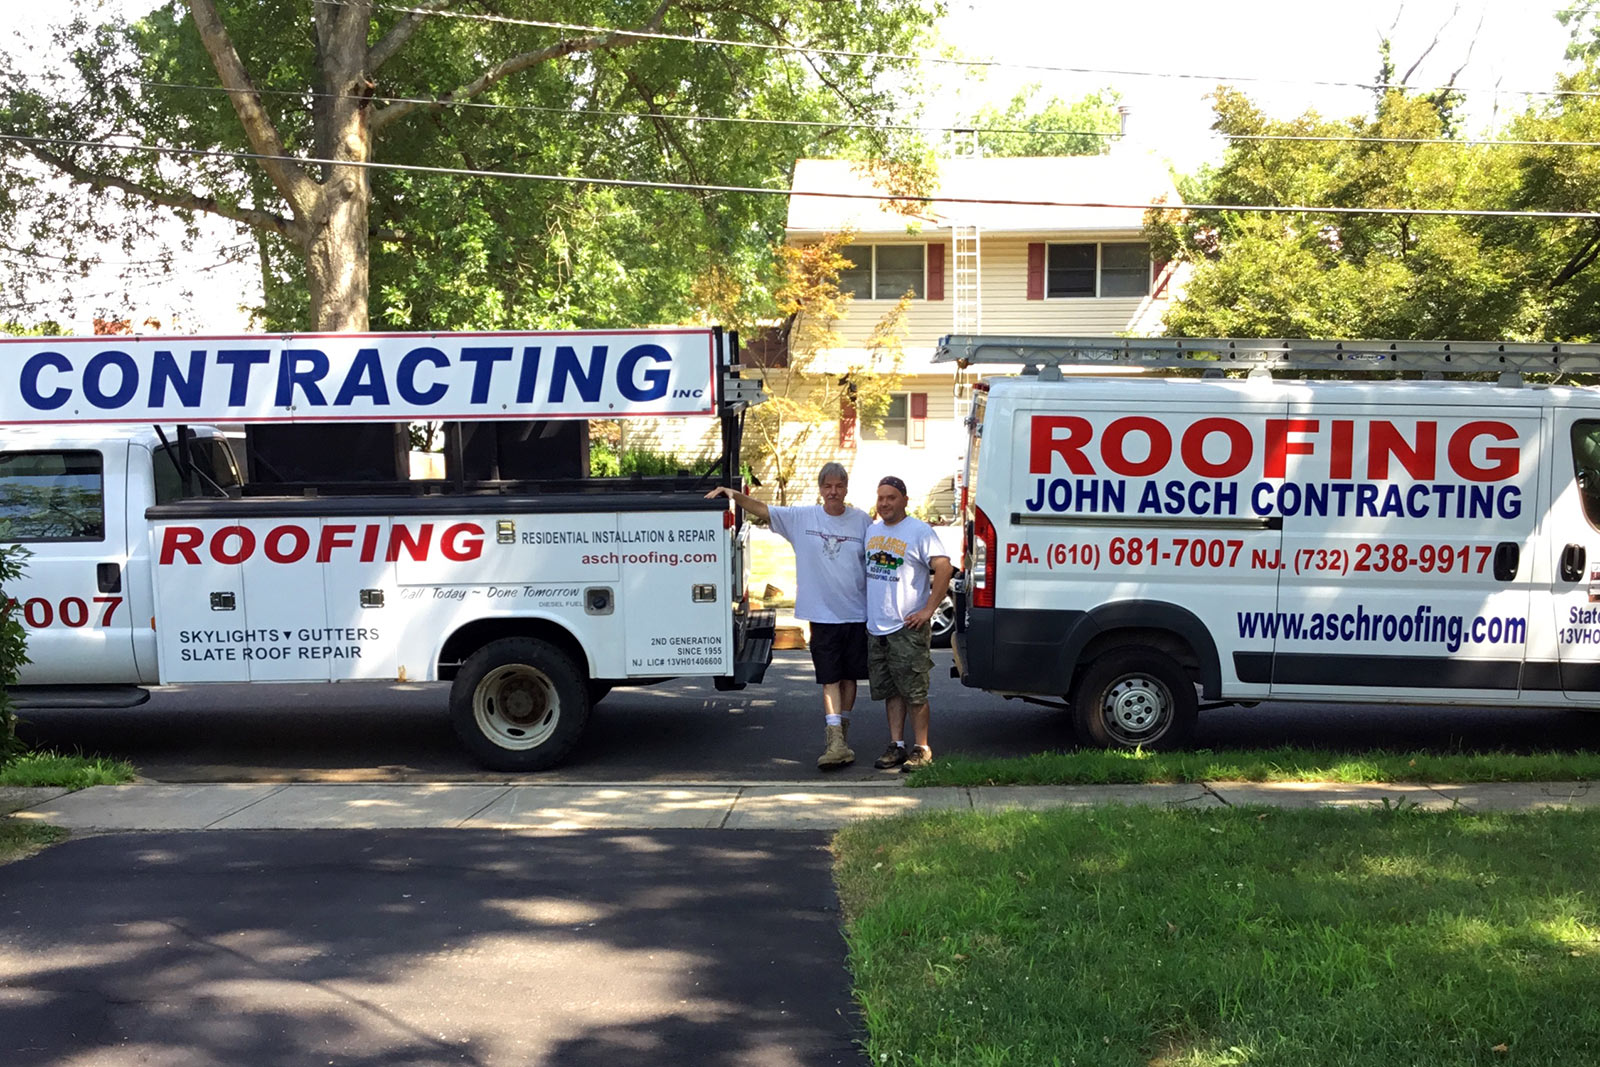 Roof installation and repair experts in New Jersey